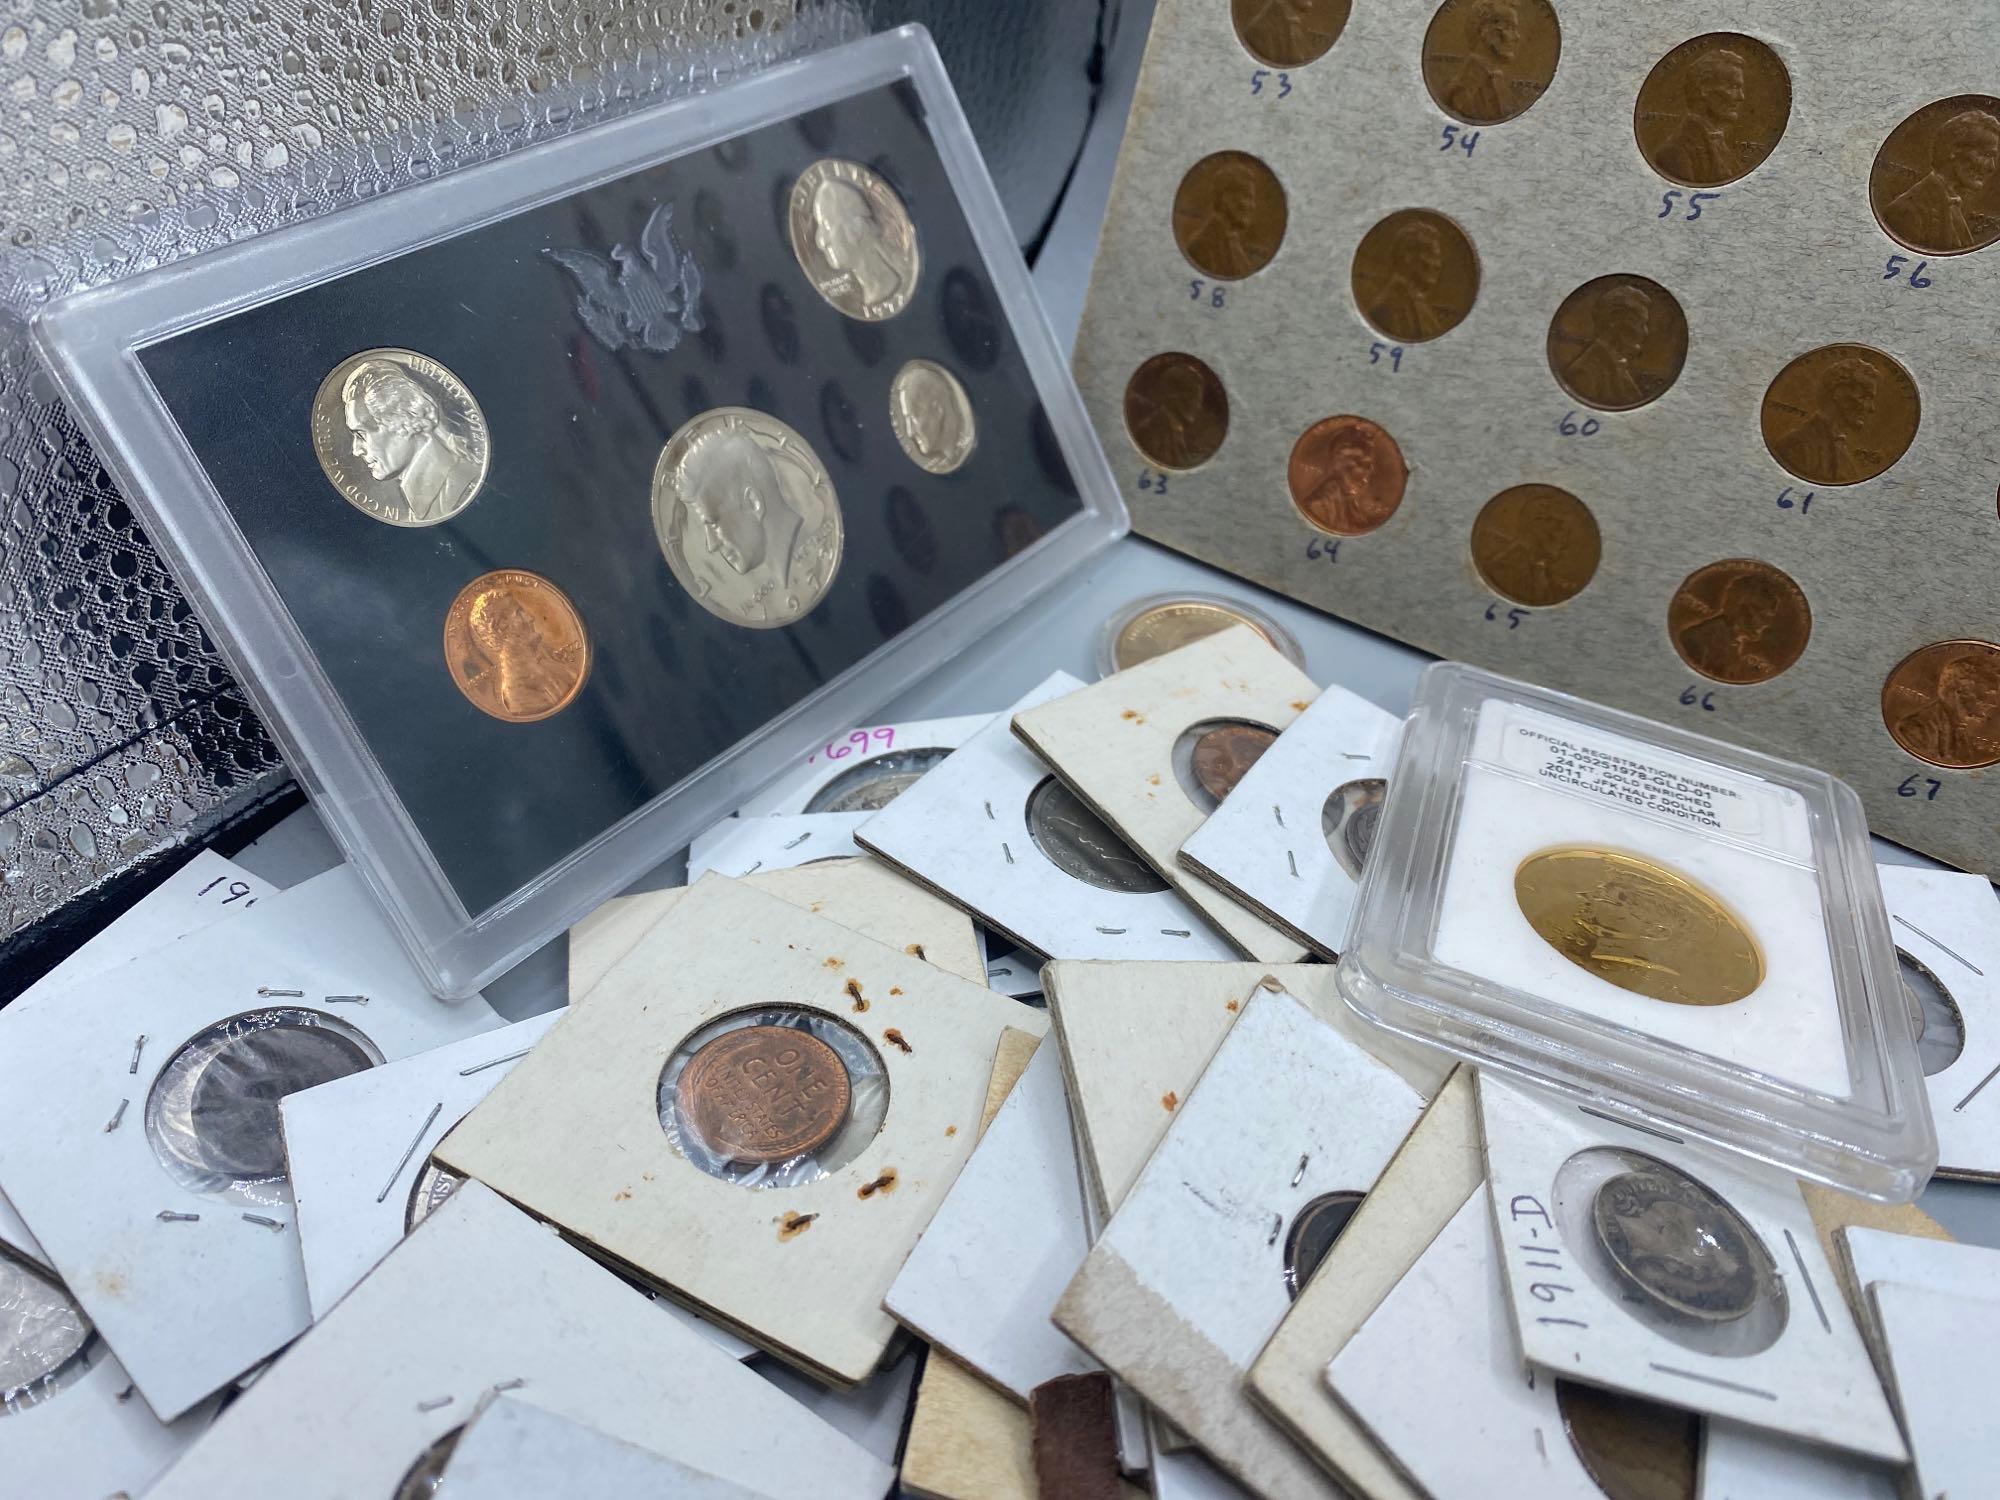 Large Collectors Grouping U.S. Silver and not silver coins. Loaded!!!